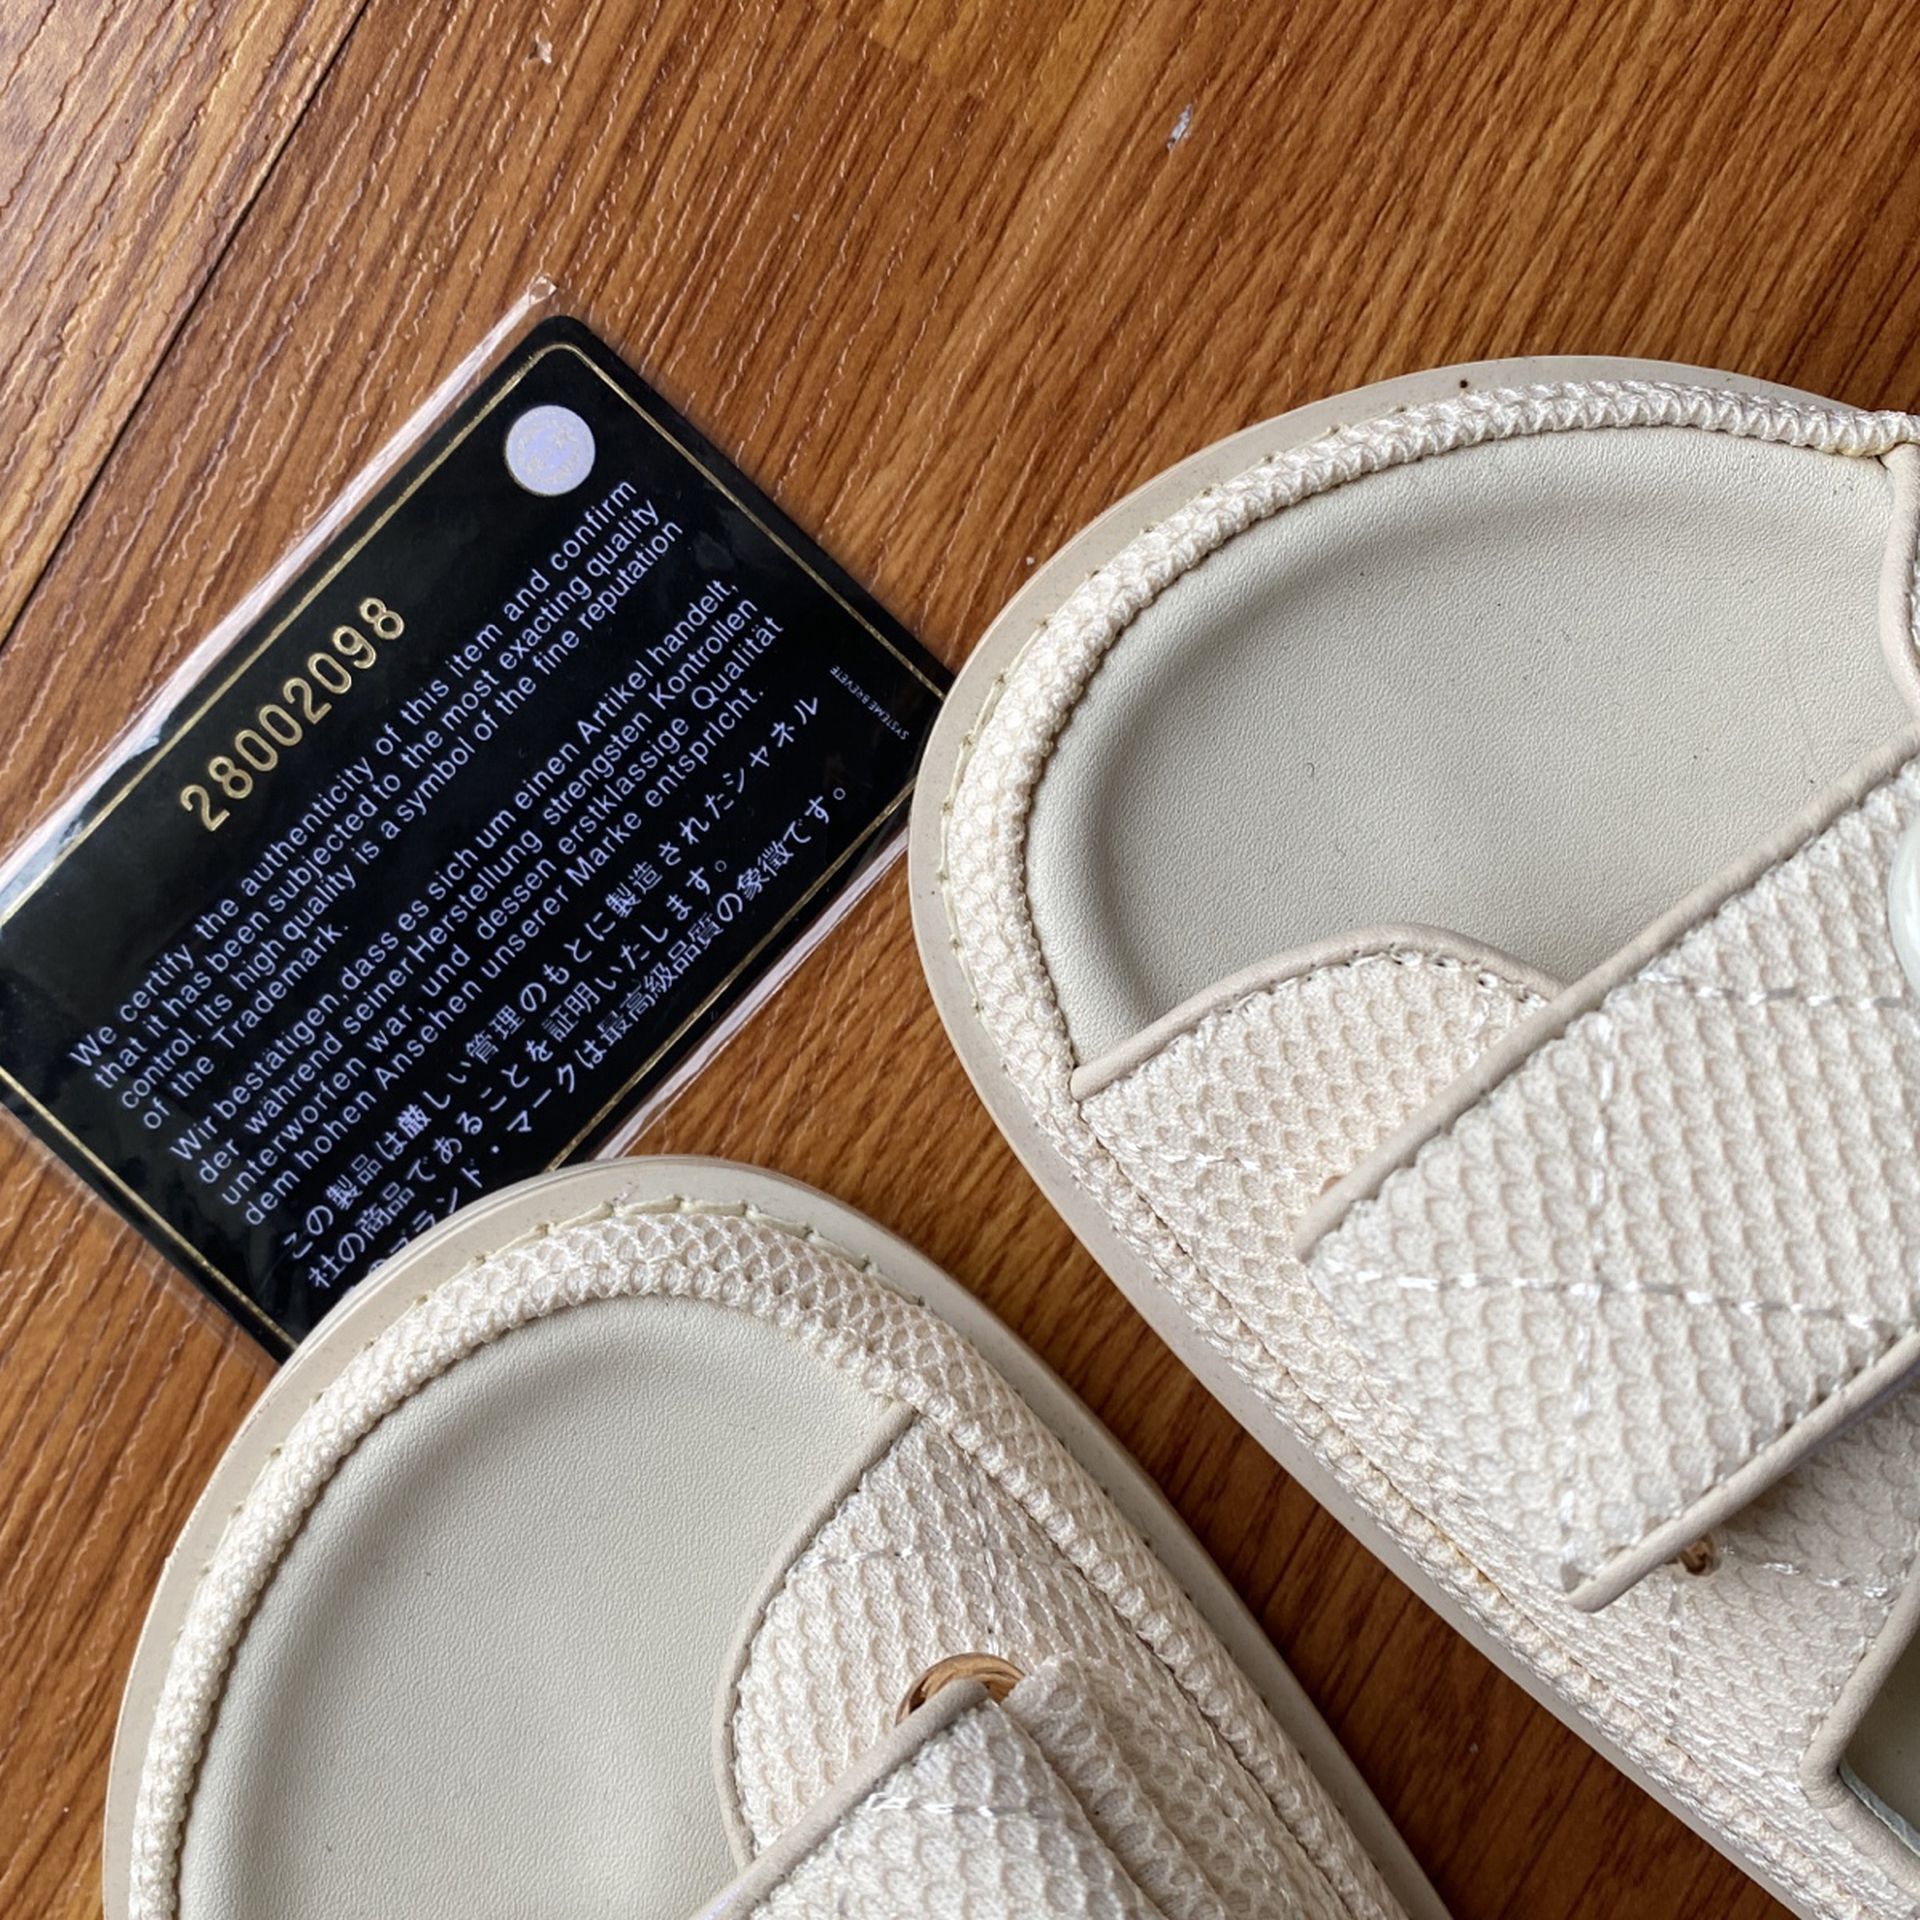 Authentic Chanel Dad Sandals for Sale in New York, NY - OfferUp